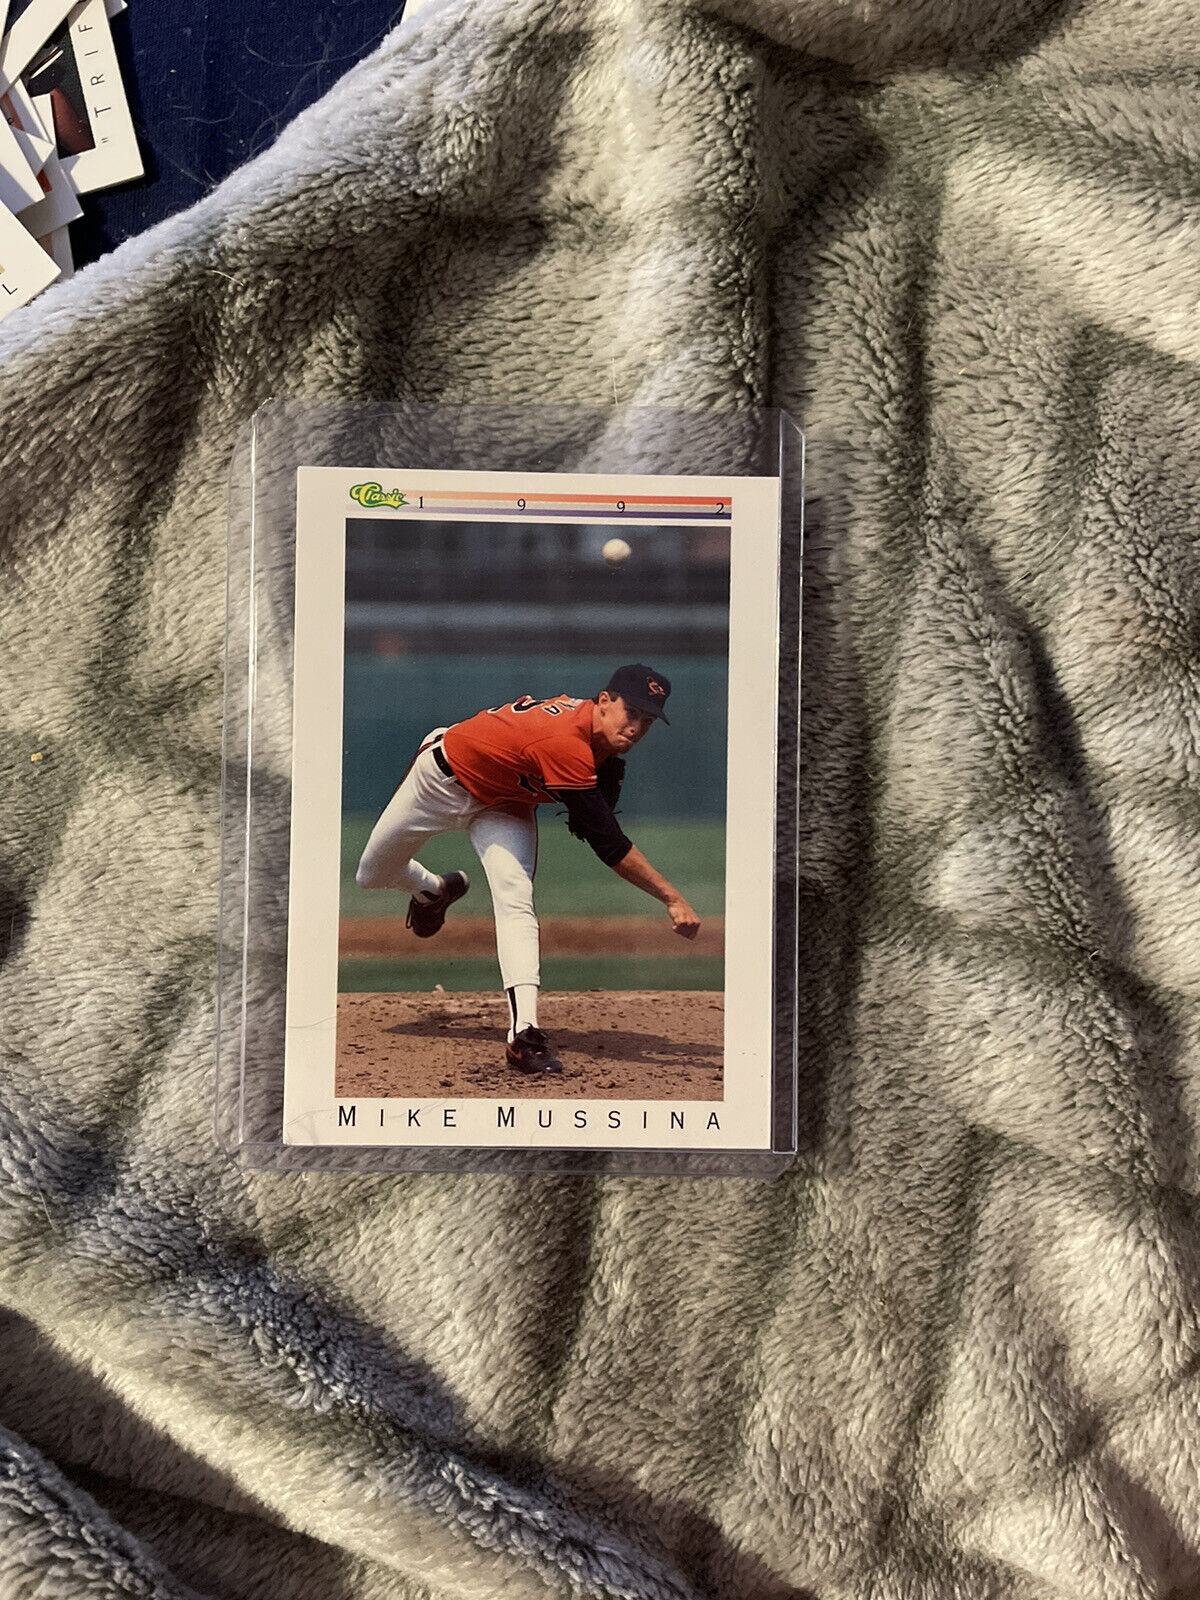 Classic 1992 mike mussina rookie card